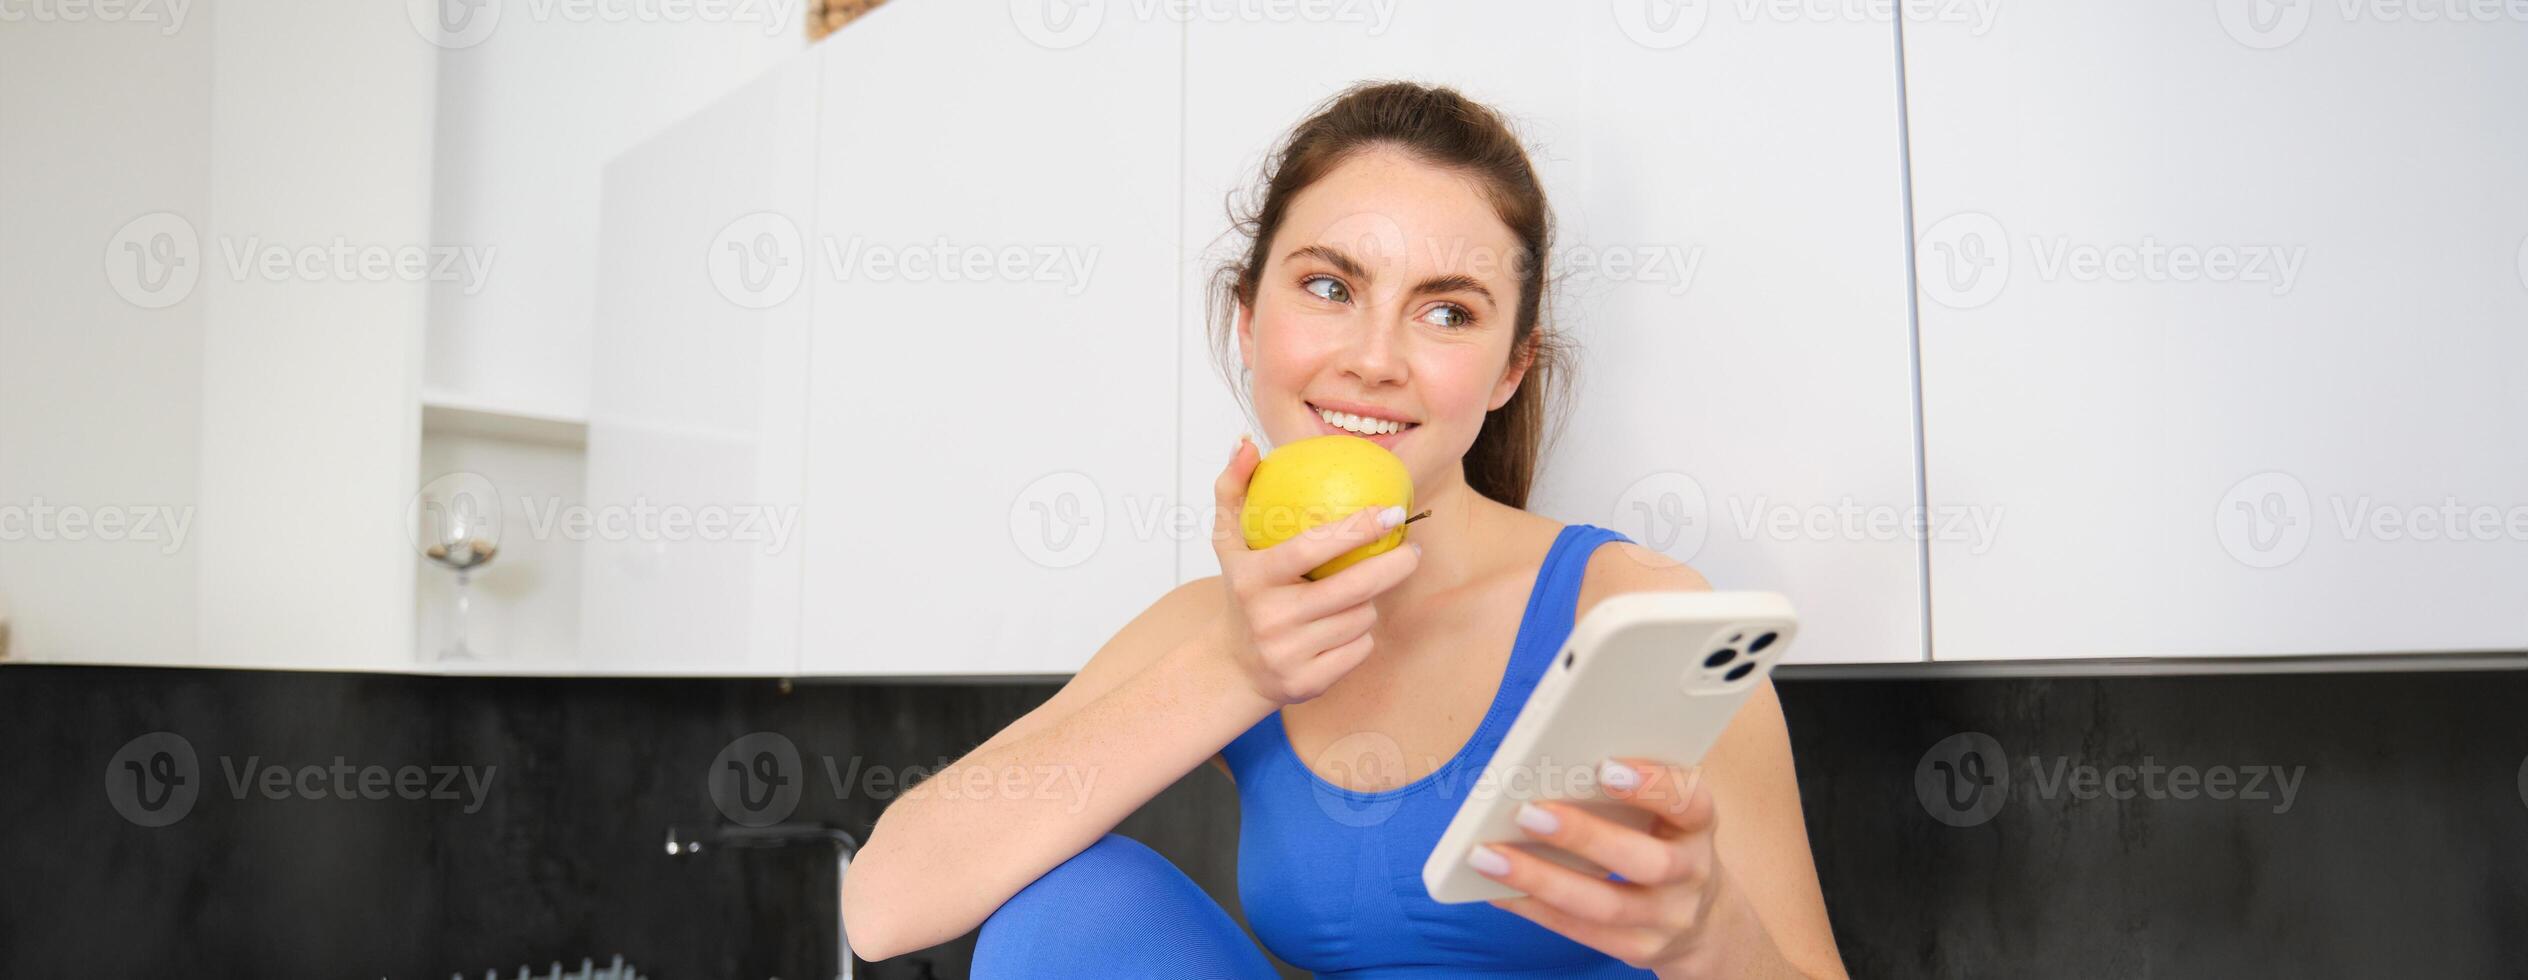 Portrait of sportswoman, girl eating and apple and looking at her social media, smartphone screen, having a snack in kitchen, wearing fitness activewear photo